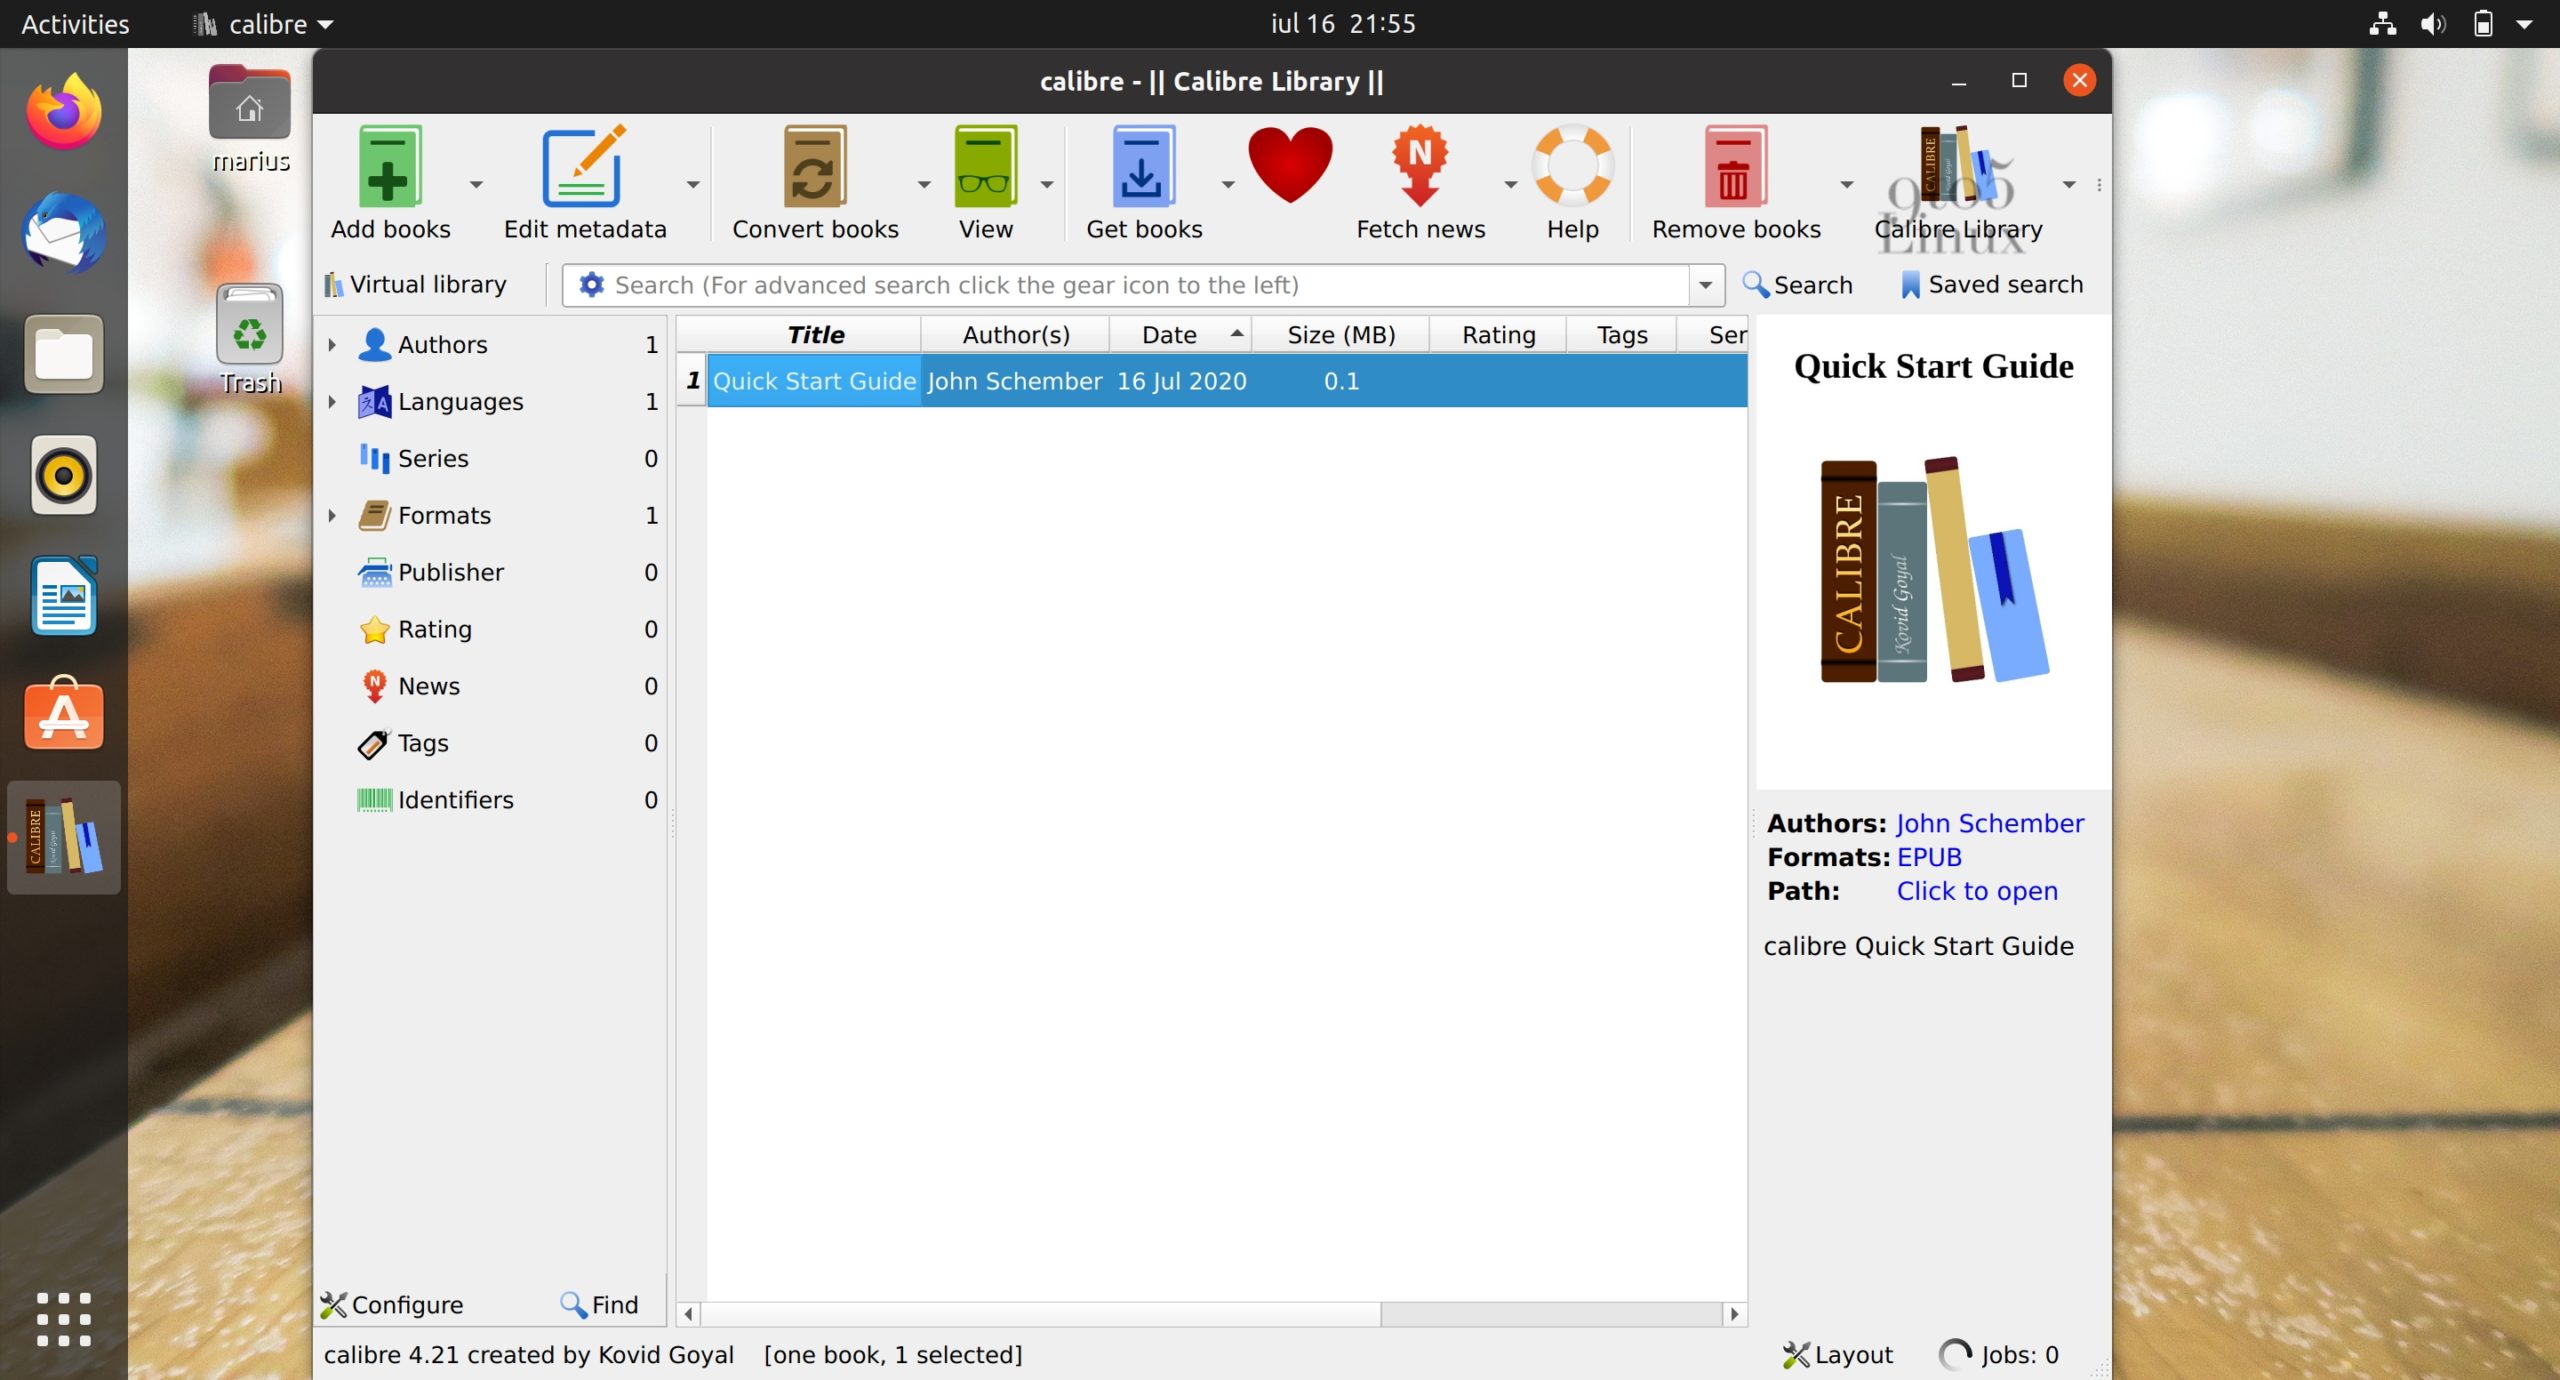 Calibre 4.21 E-book Manager Released with Support for Kobo Nia, Improvements